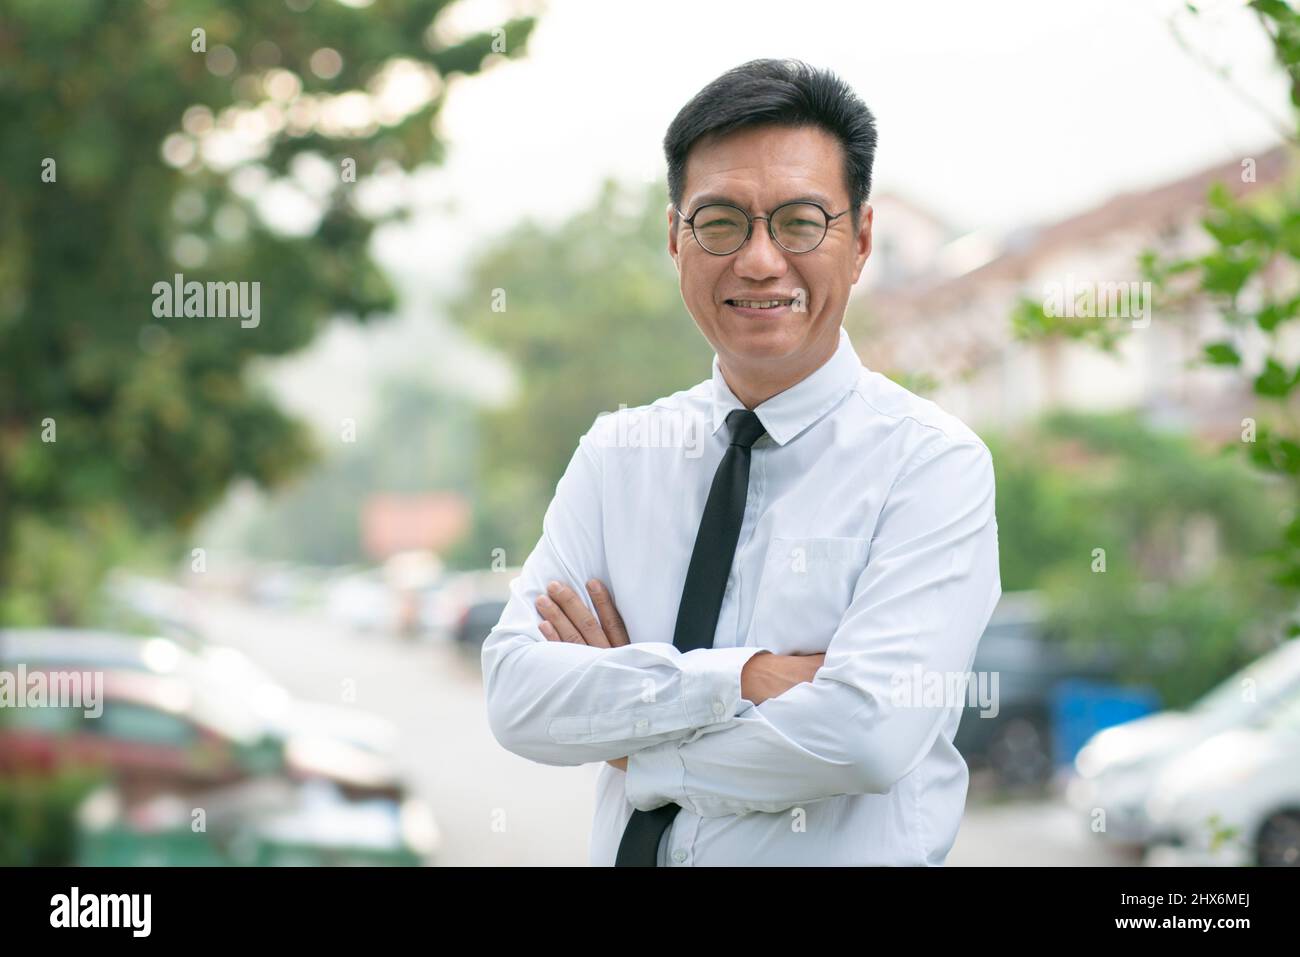 Well dressed mature Asian businessman with arms crossed, smiling confidently. Urban residential property at the background. Stock Photo